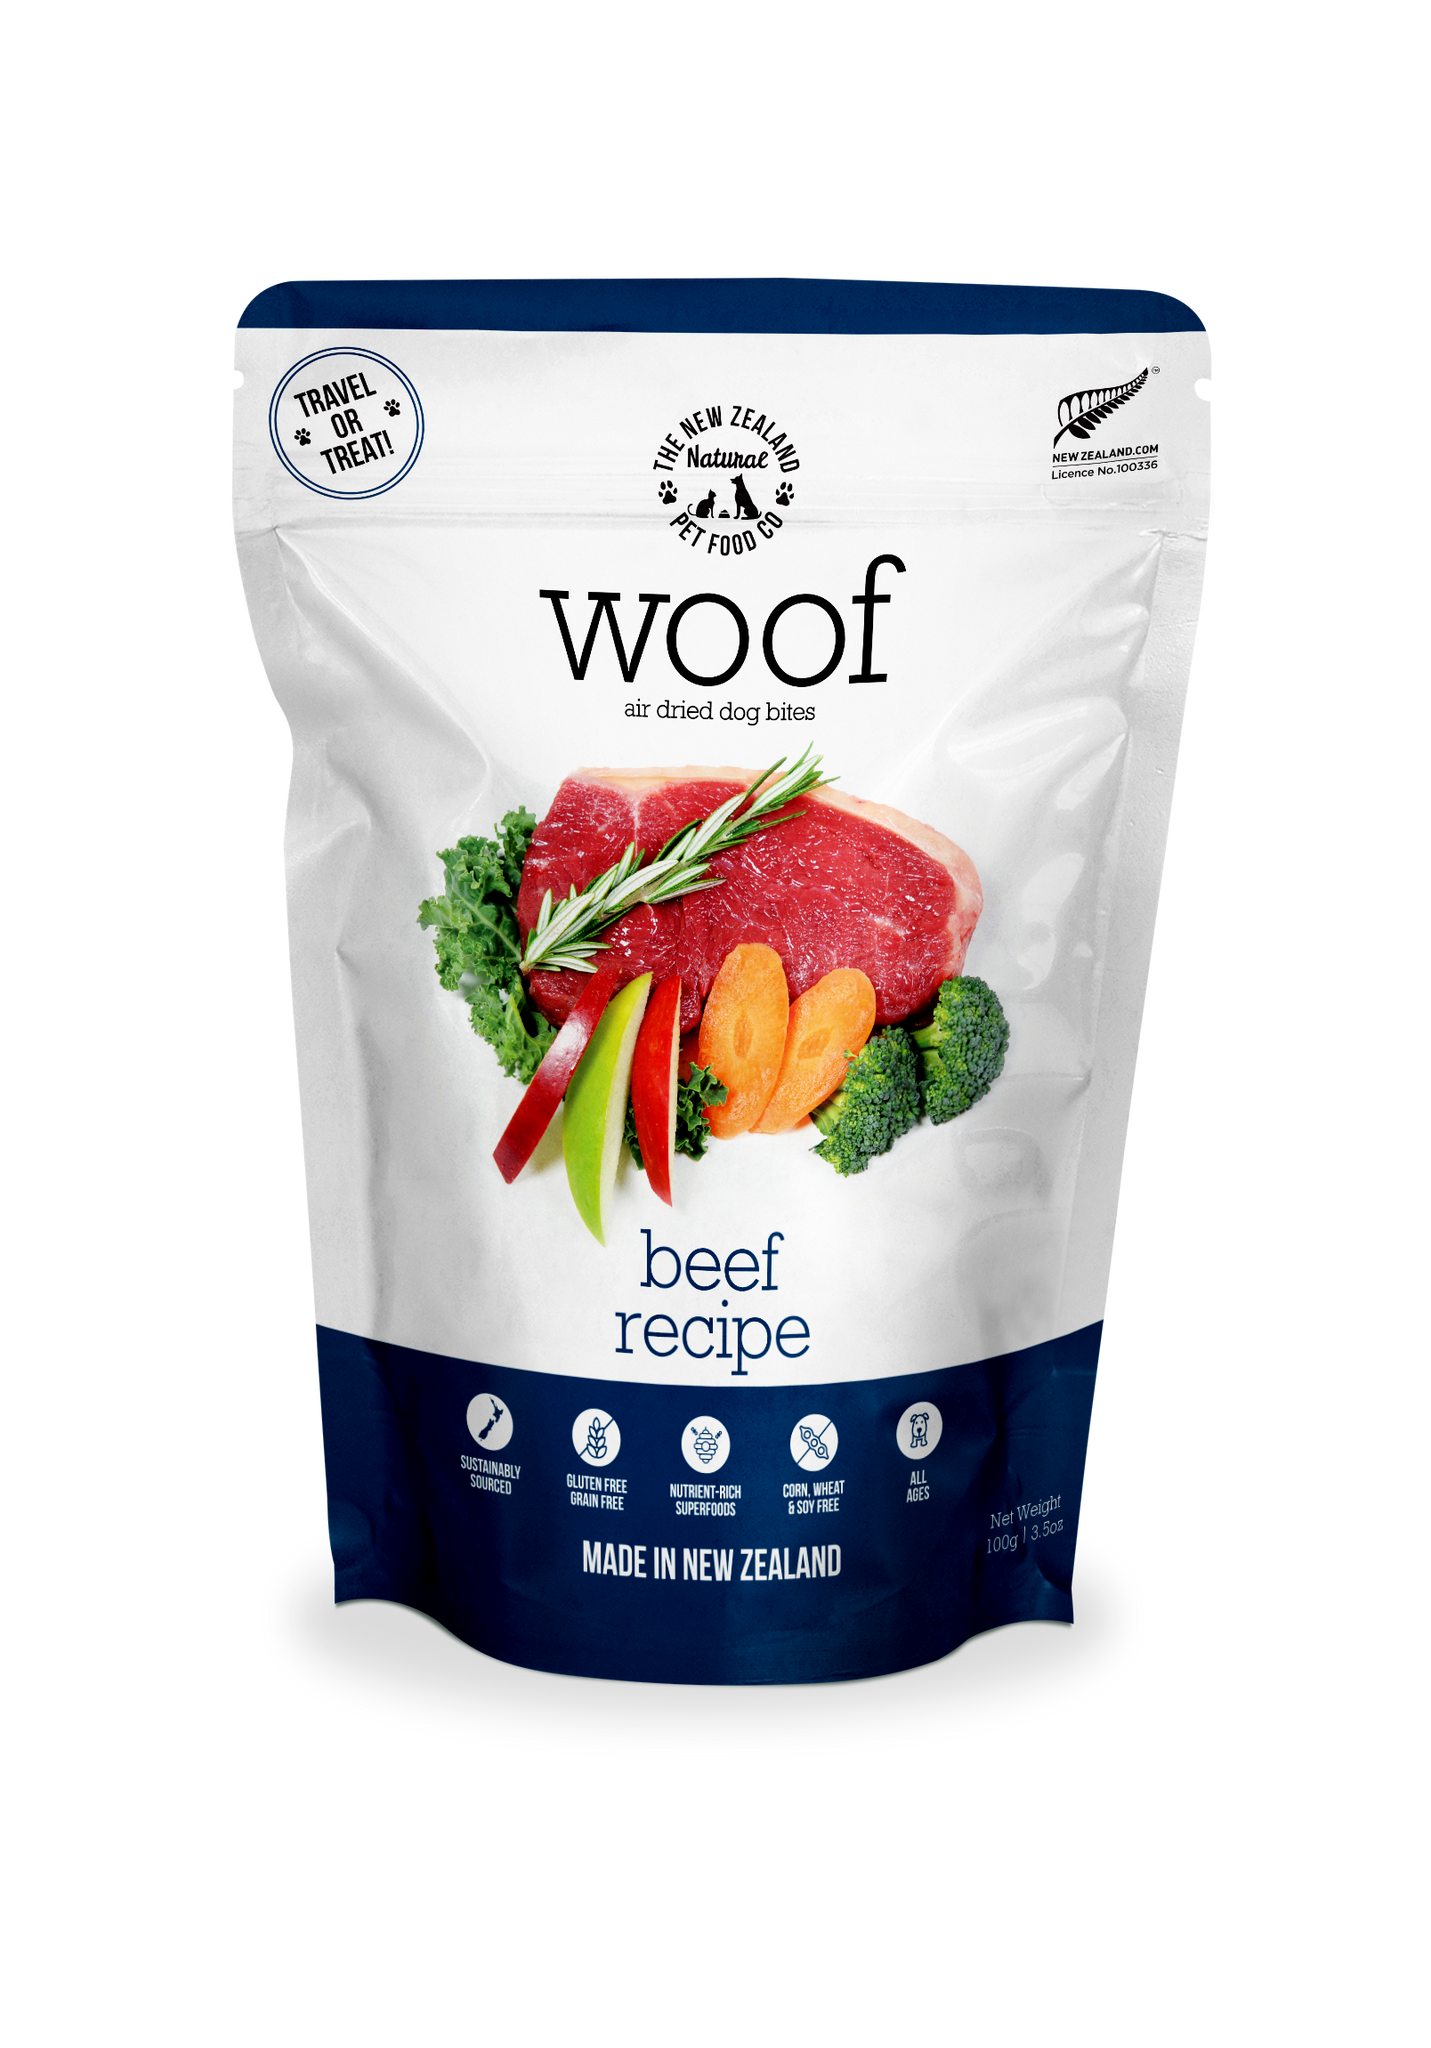 New Zealand Natural Air Dried Woof Beef